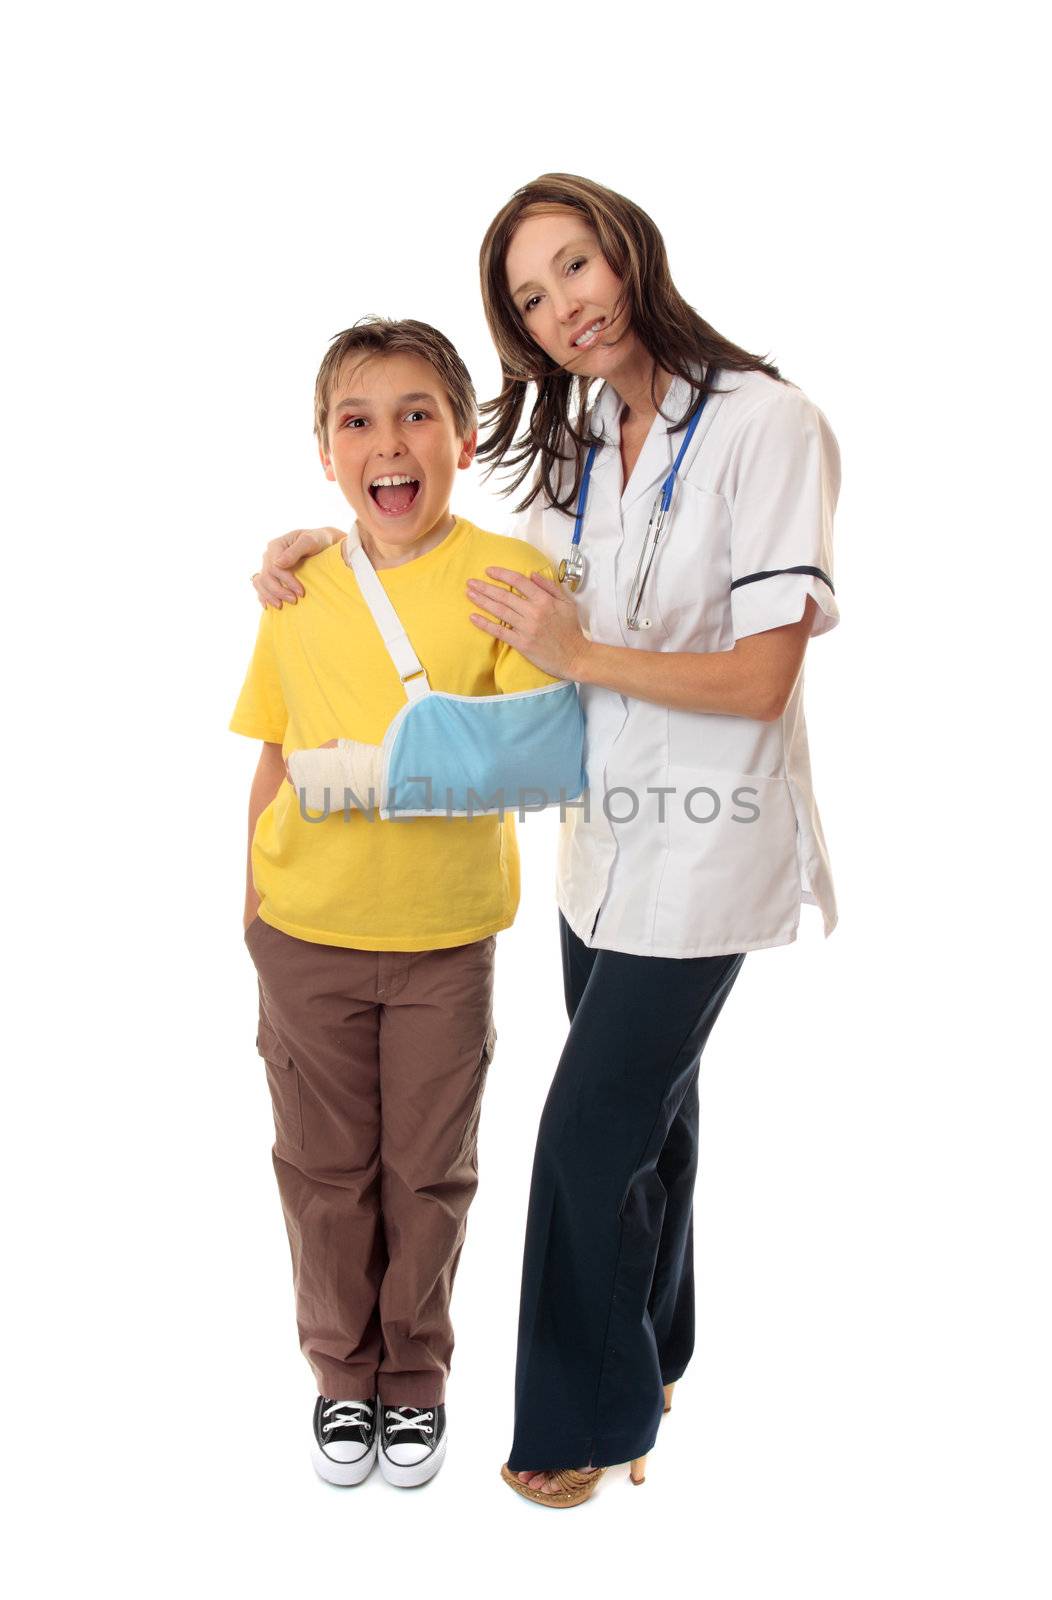 Nurse stands with a happy young  patient after being treated for injuries.